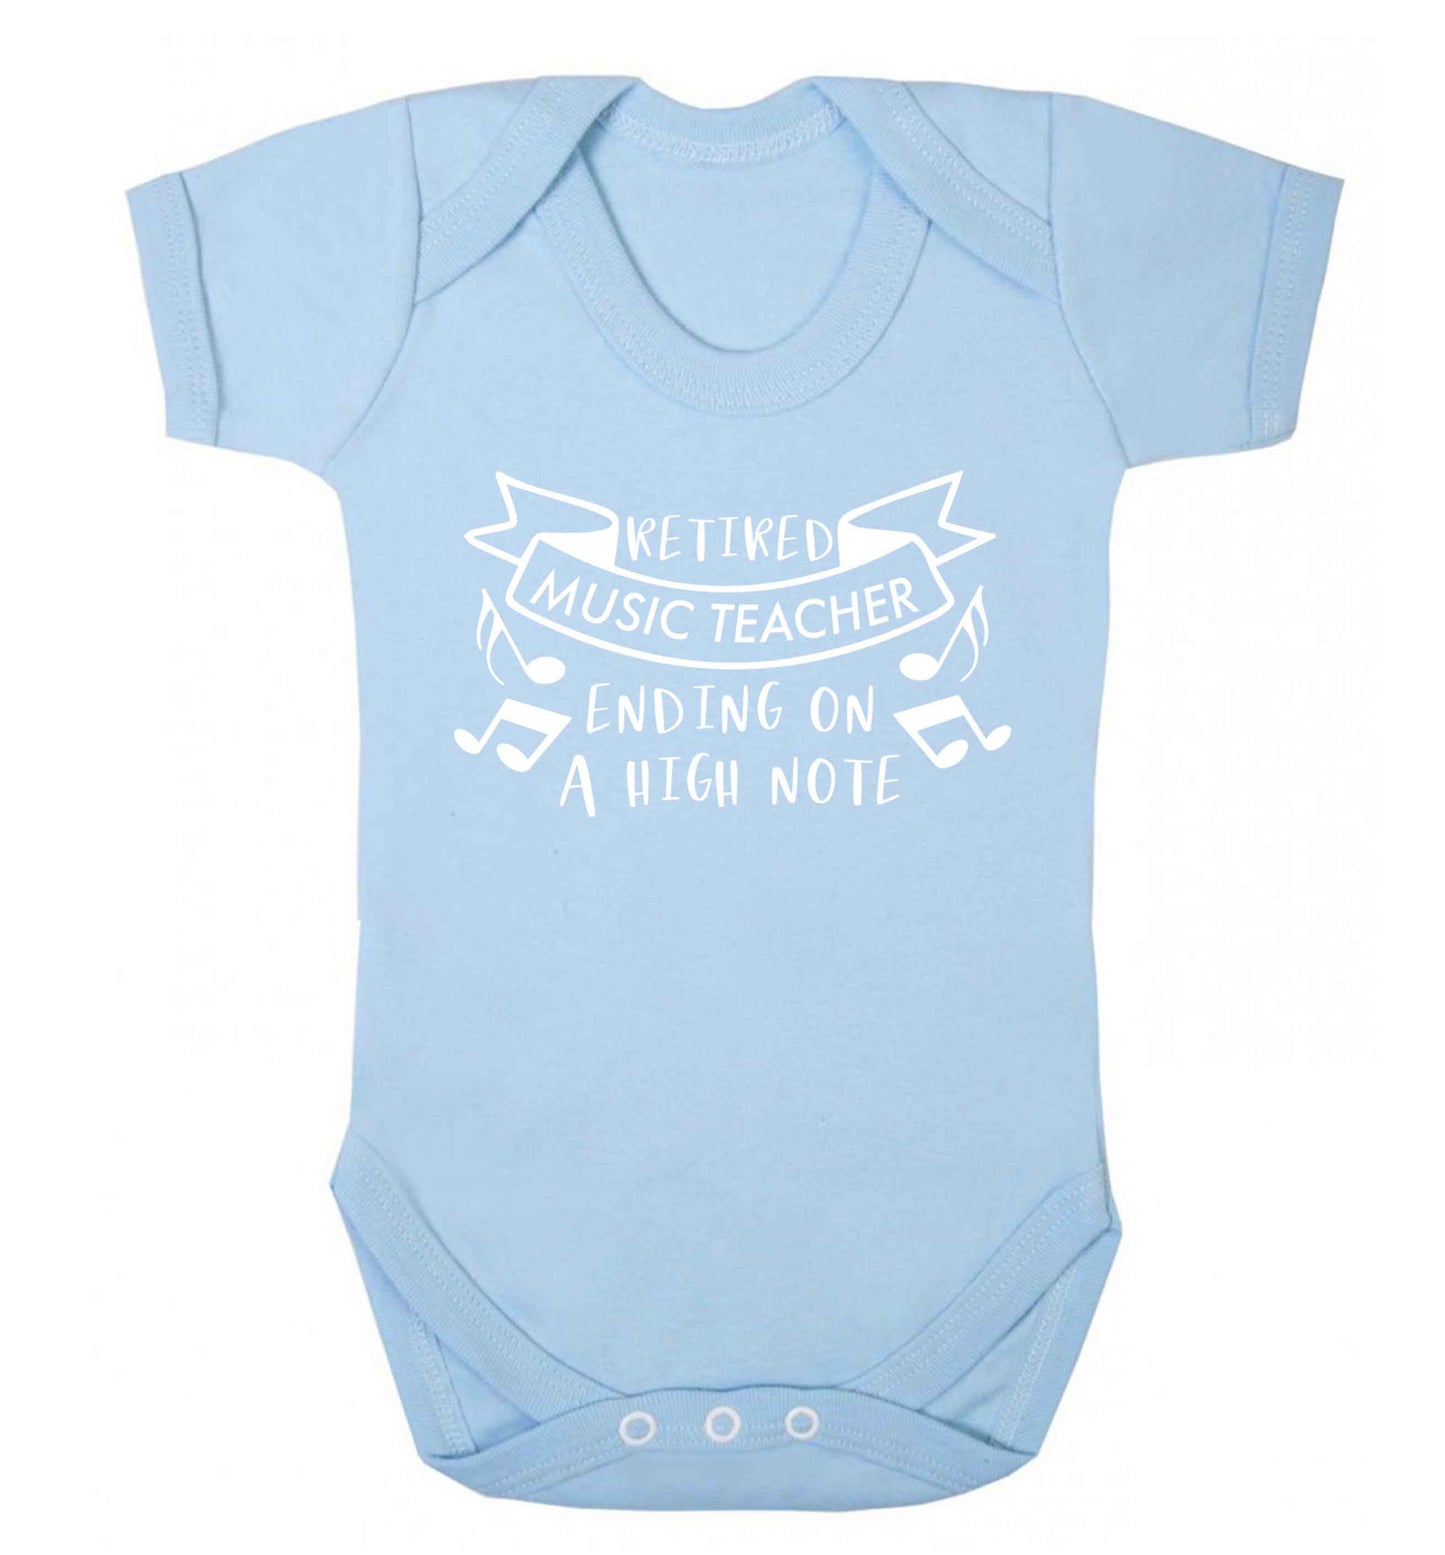 Retired music teacher ending on a high note Baby Vest pale blue 18-24 months